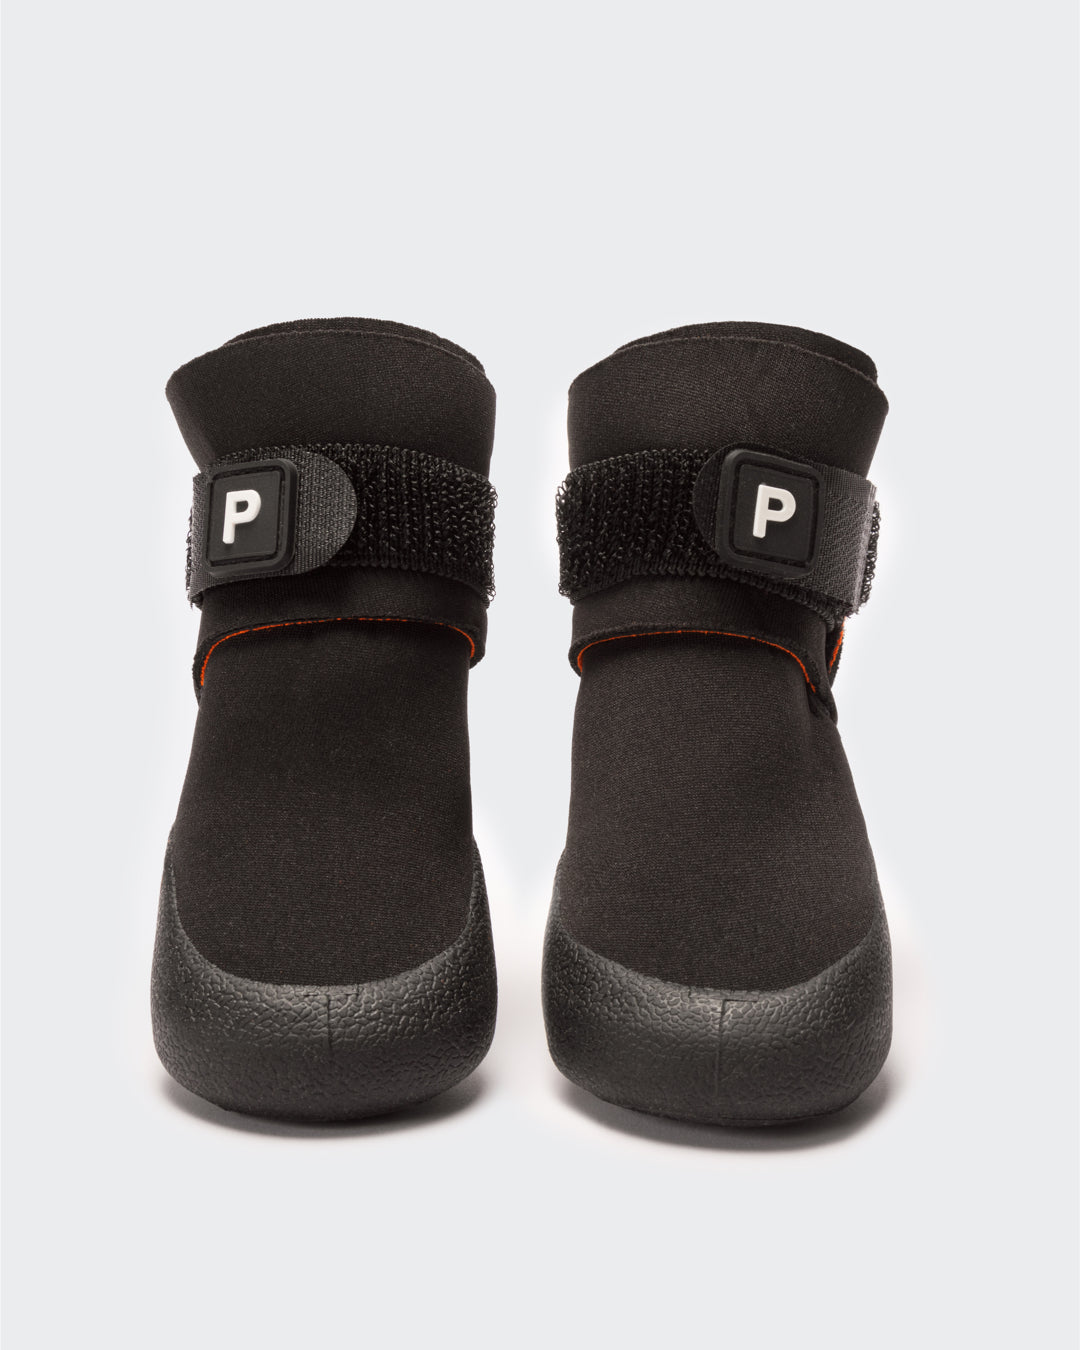 PAIKKA Paw Protector Dog Shoes